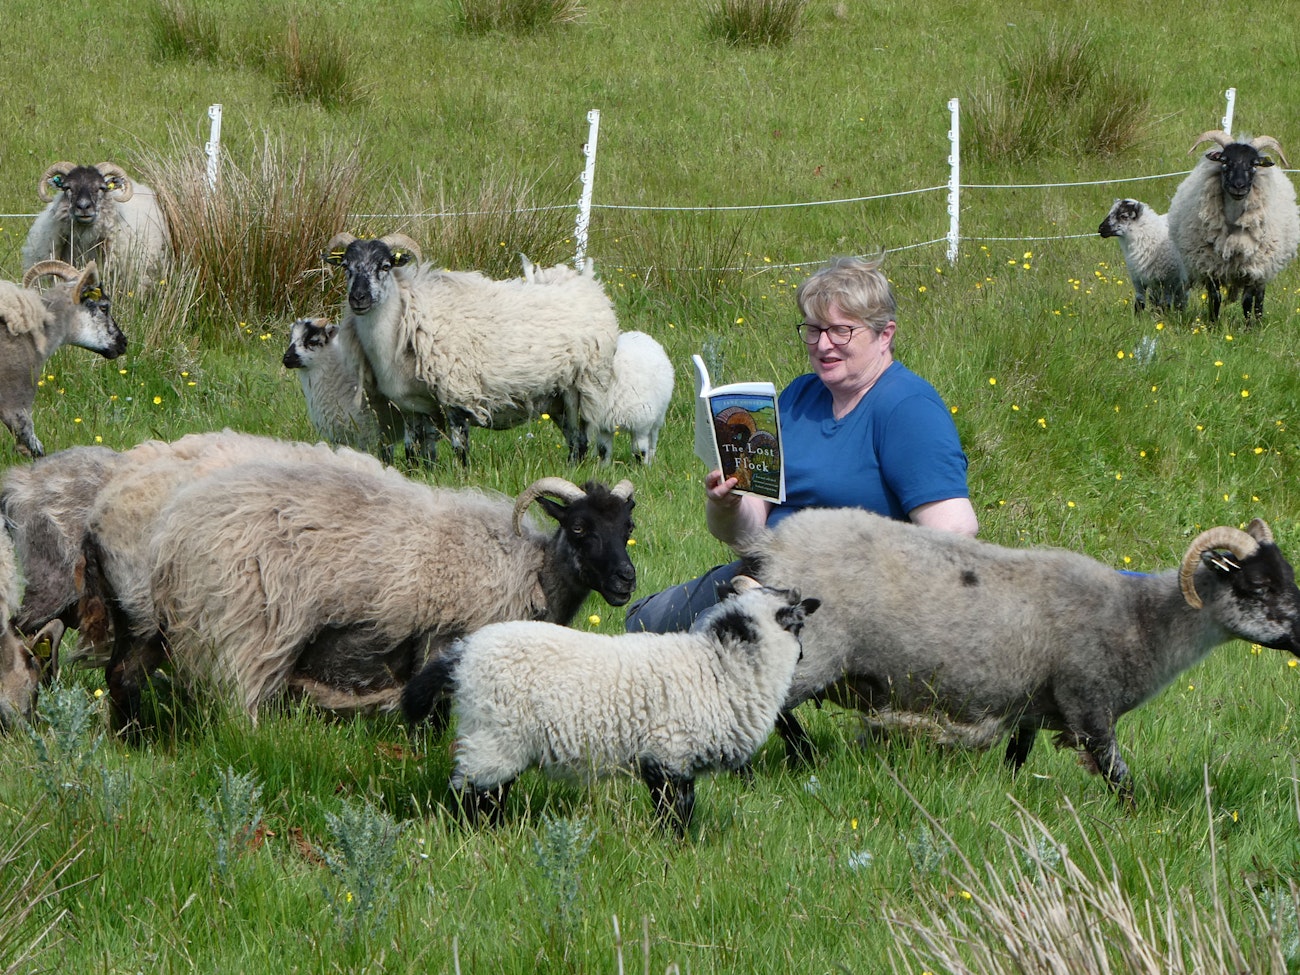 Woman in blue shirt sitting in field reading from paperback book "The Lost Flock," surrounded by ewes and lambs.